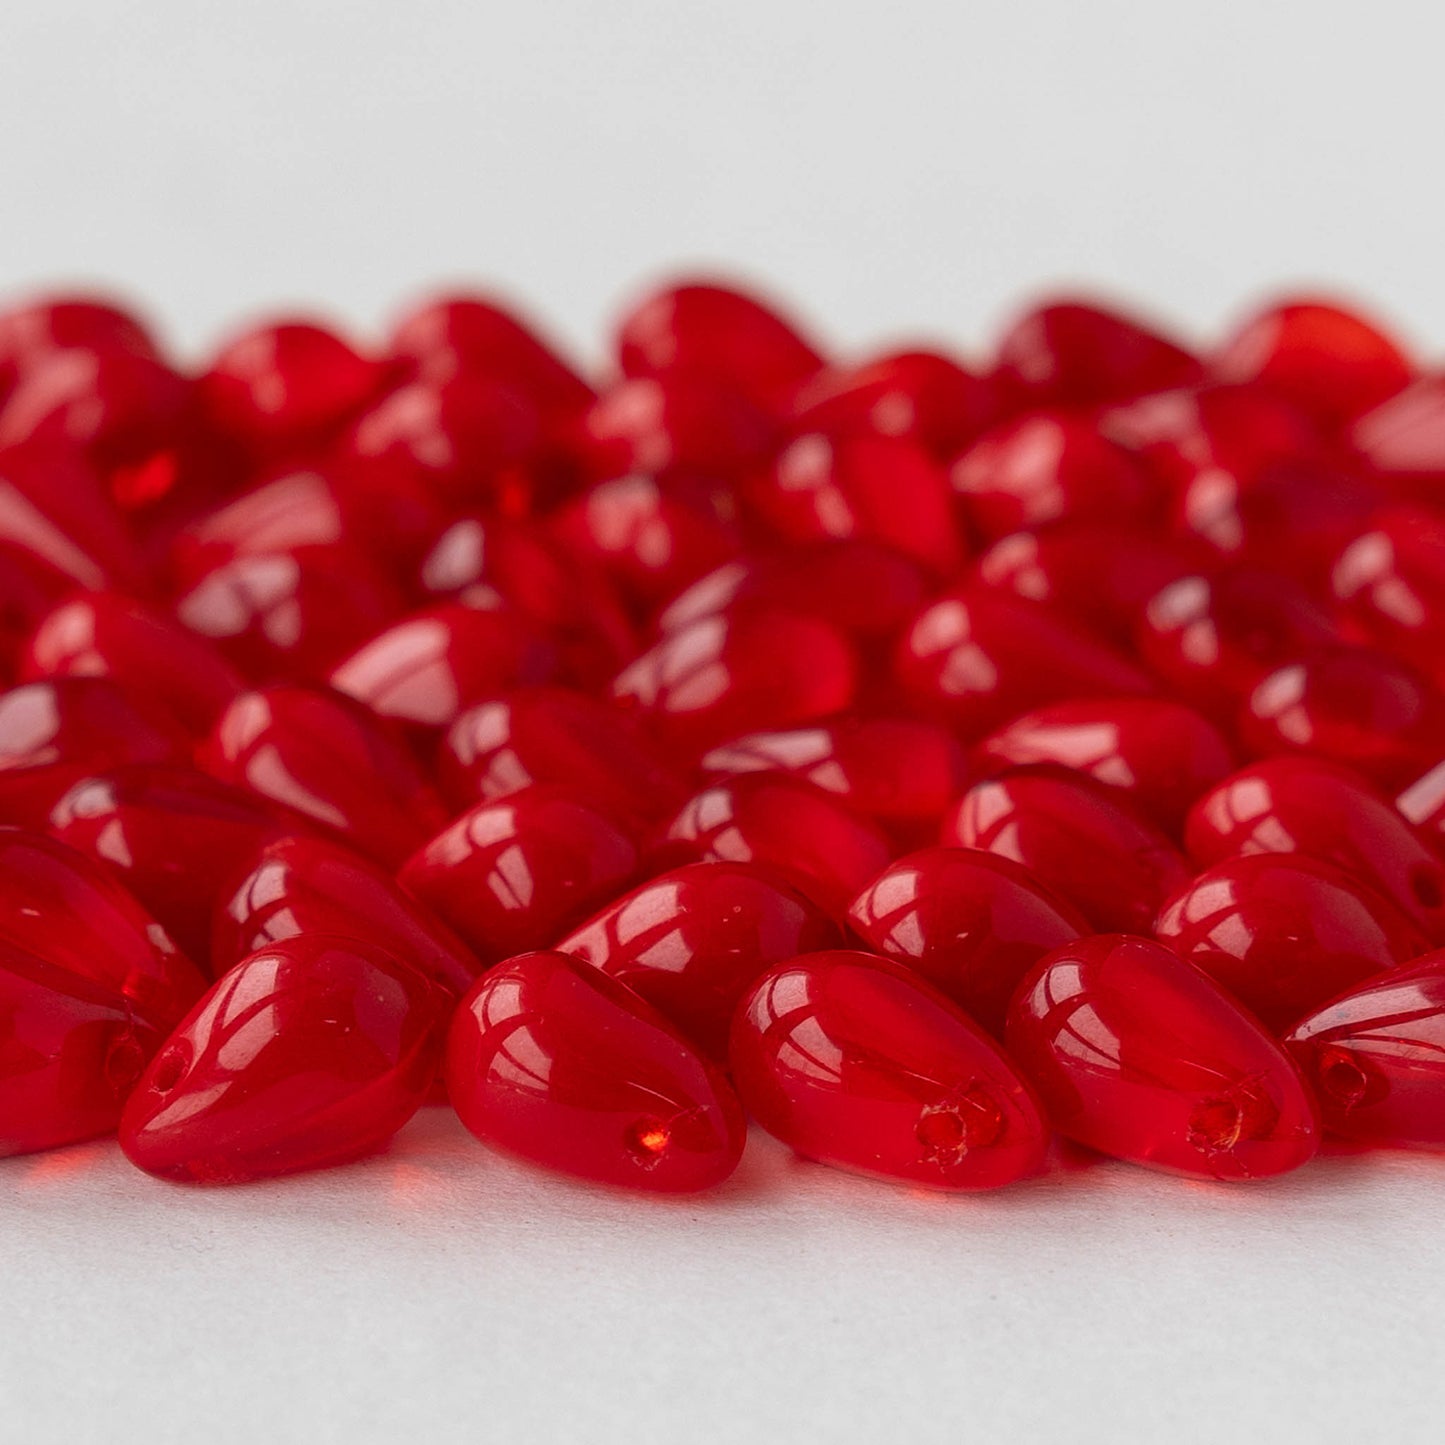 6x9mm Glass Teardrop Beads - Red Crystal Mix - 40 Beads